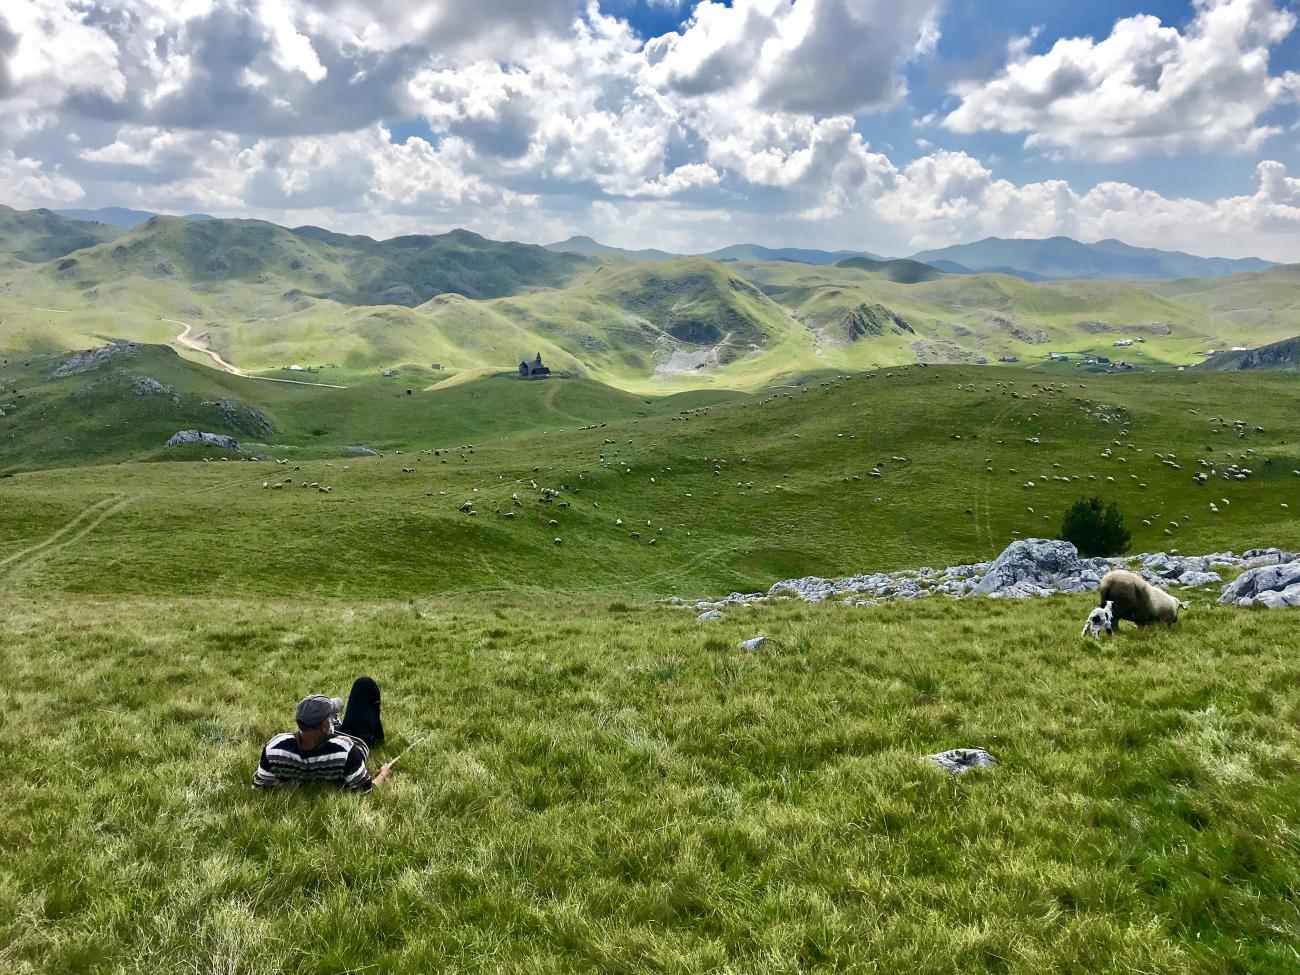 The Sinjajevina highlands - rolling green hills. In the background is a small church. In the foreground a man relaxes on the grass. To the right of the photo there is a sheep and lamb.